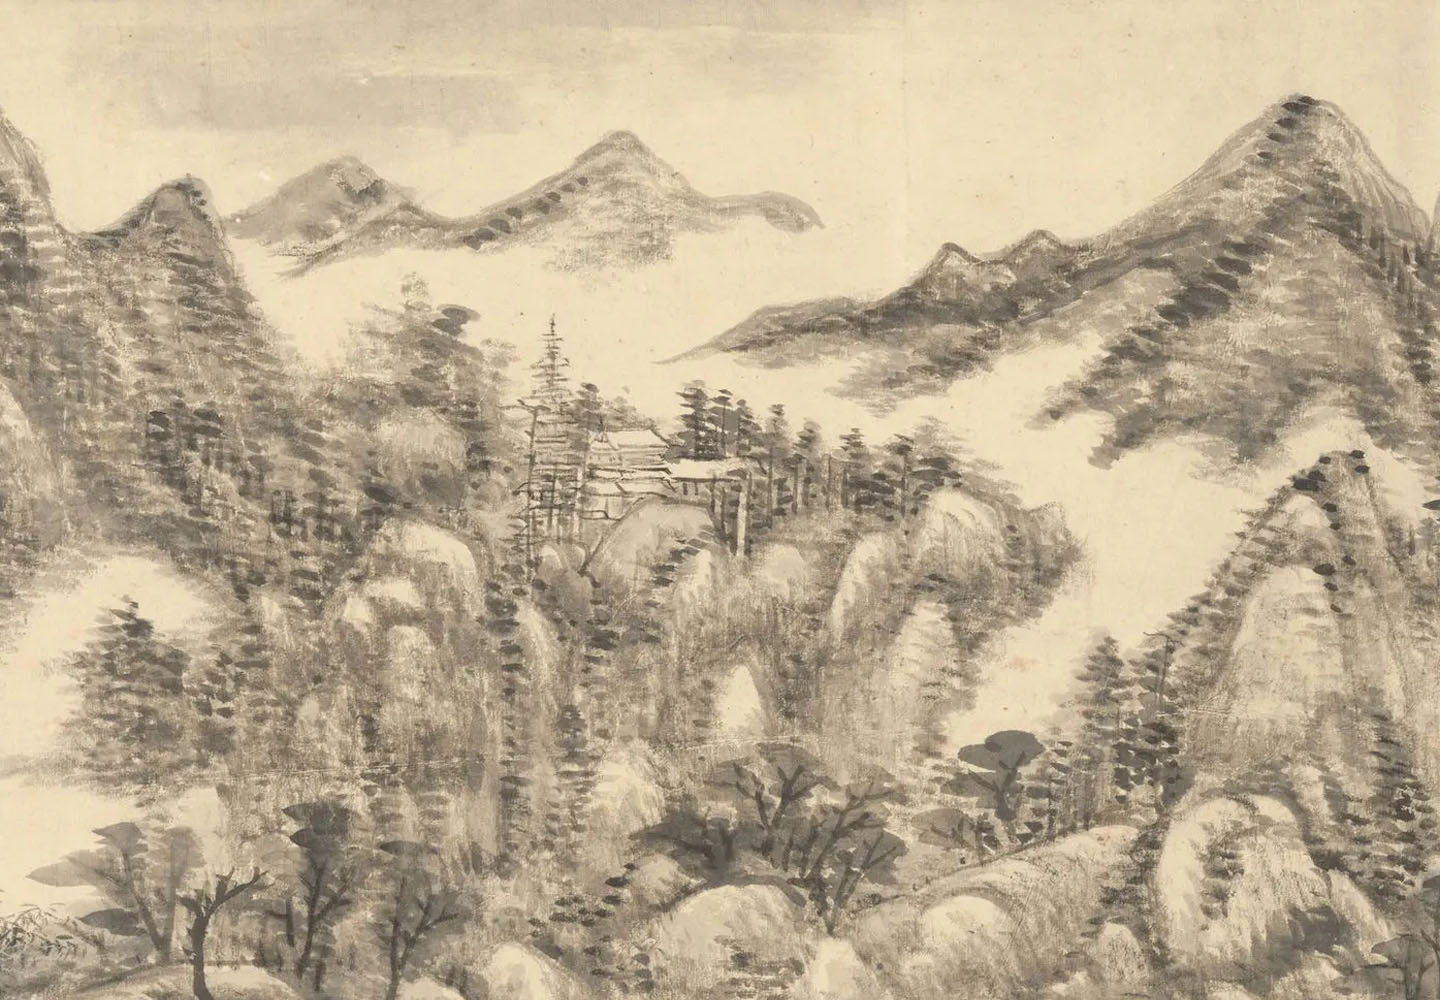 Learning to Paint in Premodern China